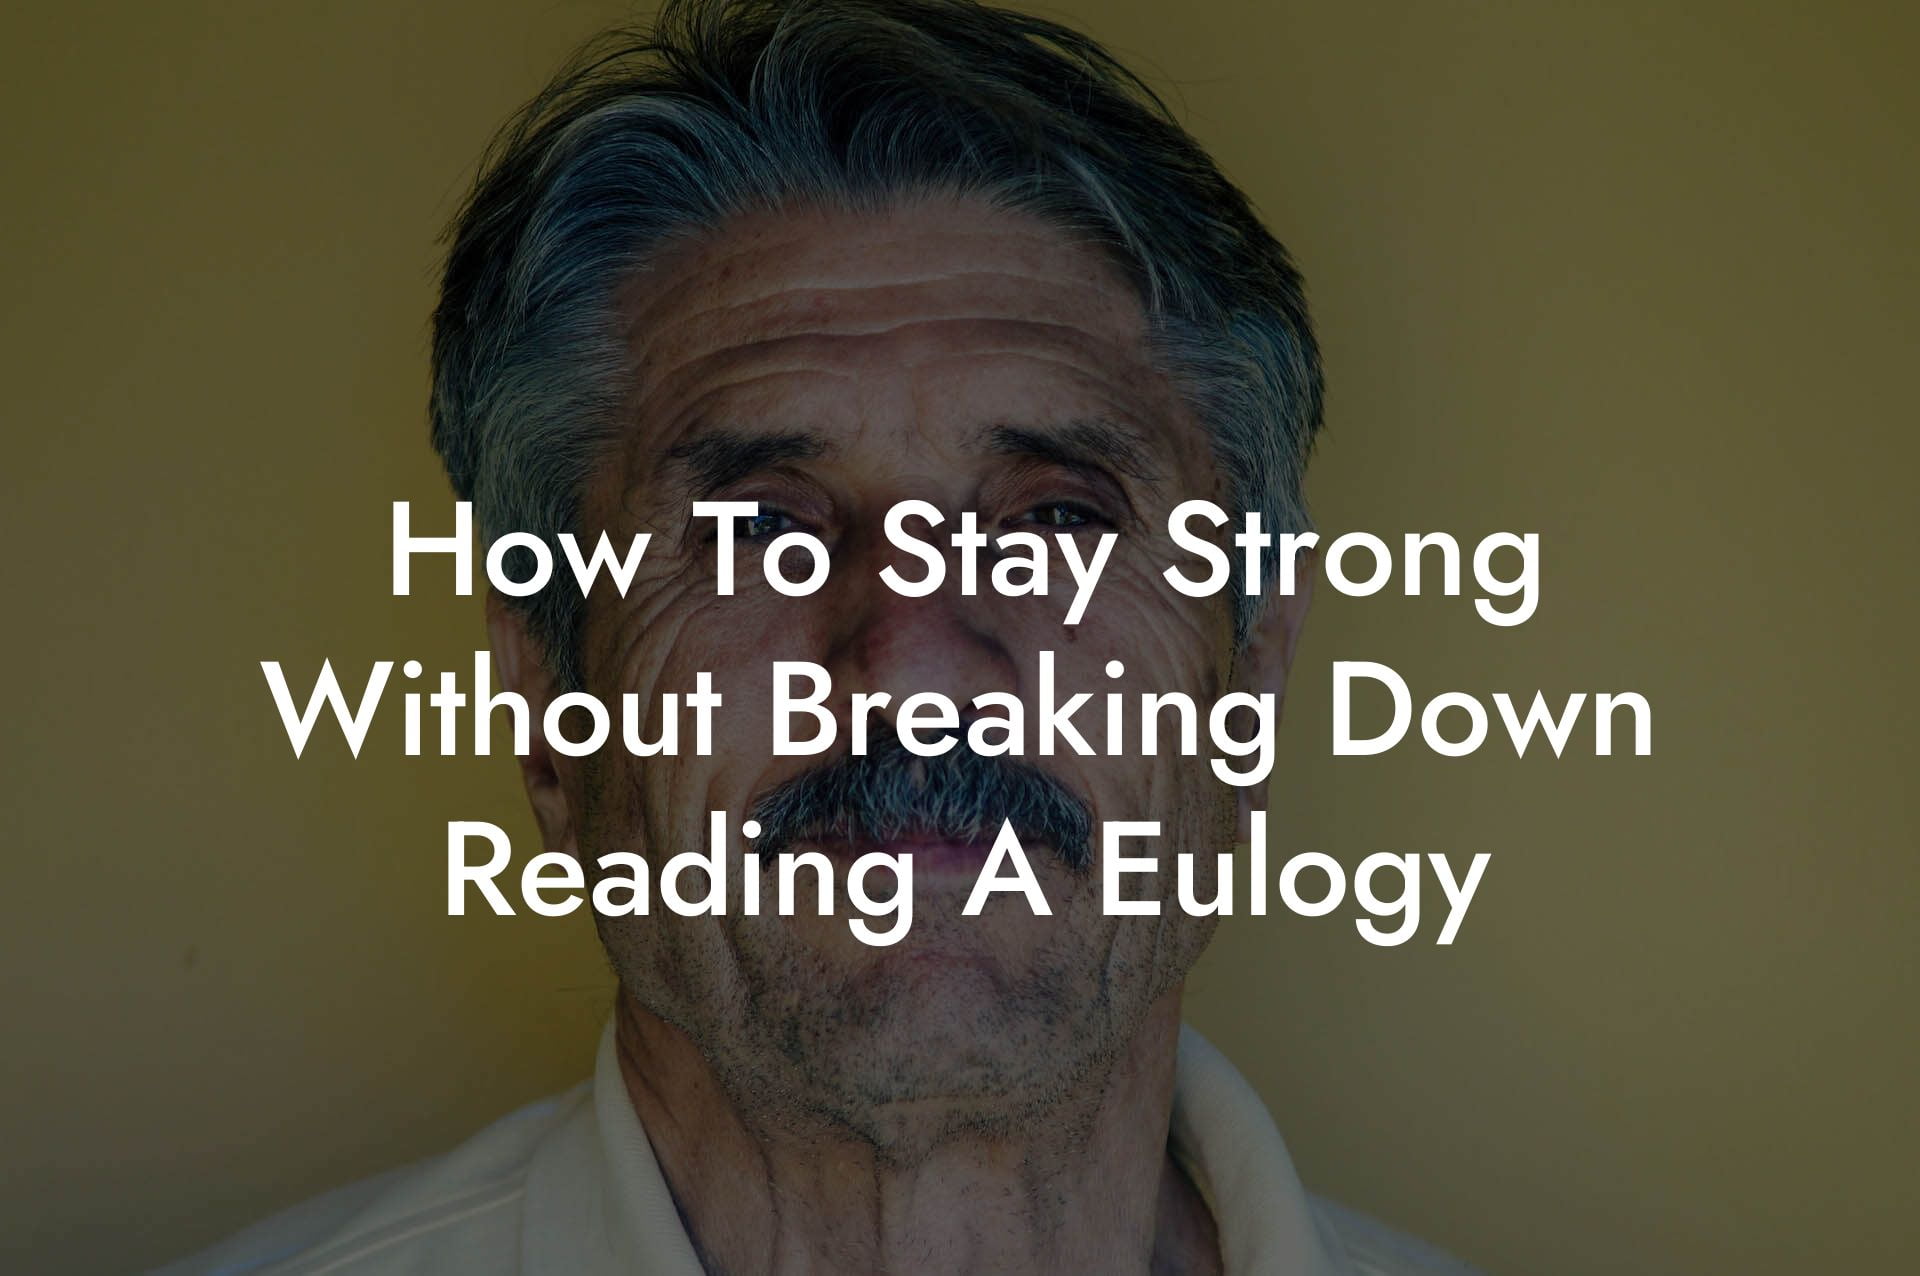 How To Stay Strong Without Breaking Down Reading A Eulogy